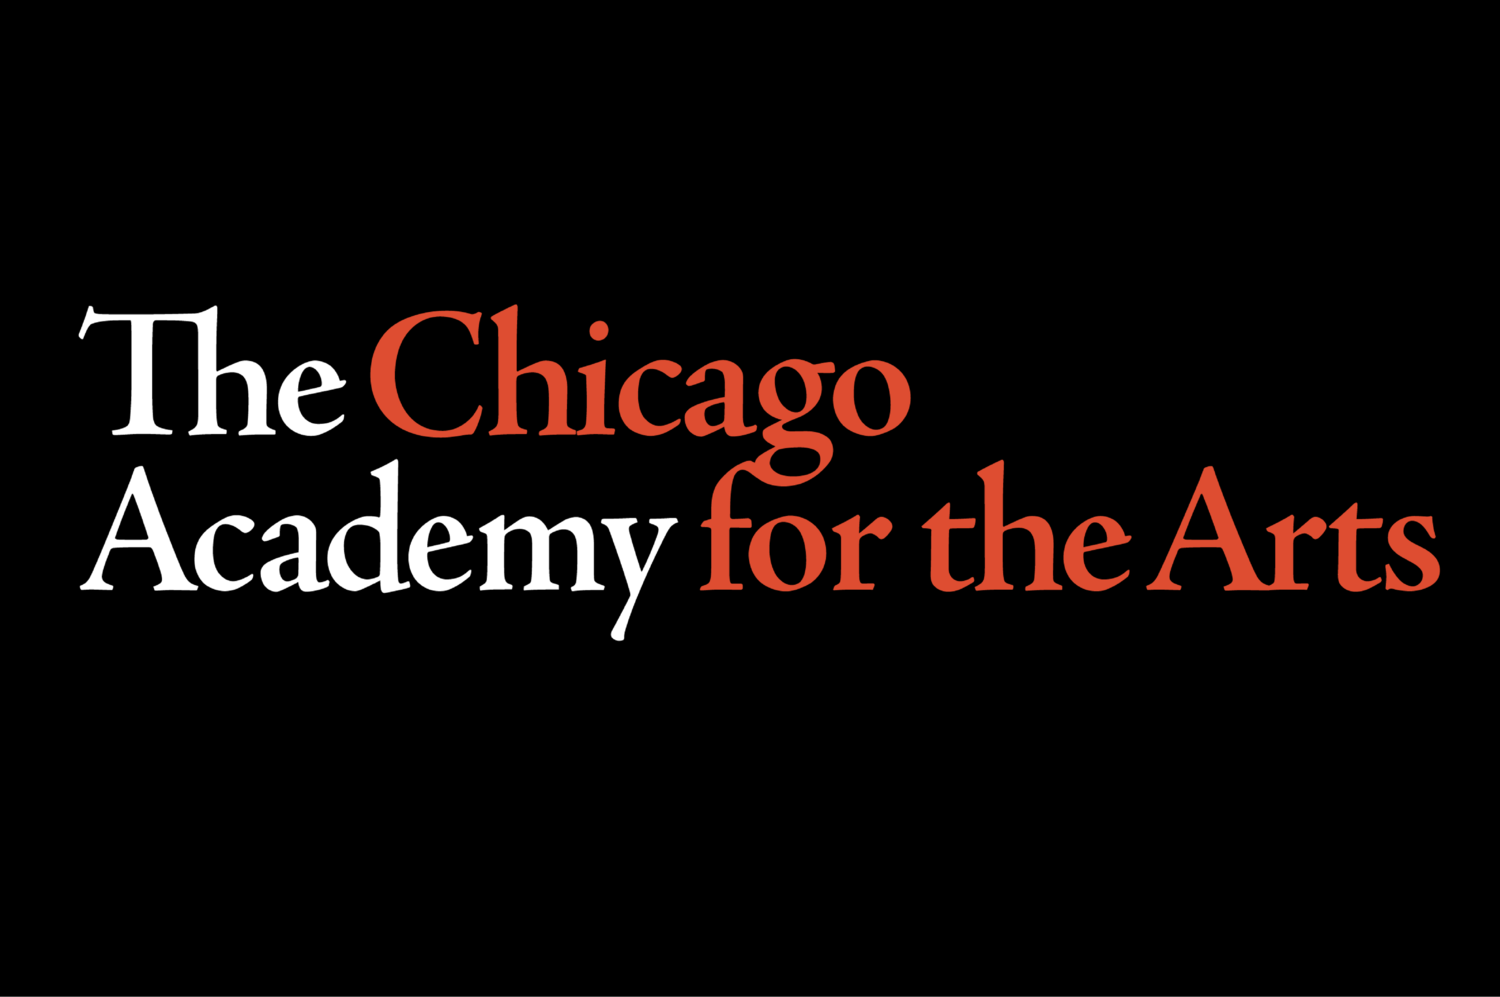 Chicago Academy for the Arts | ChicagoAcademyForTheArts.com